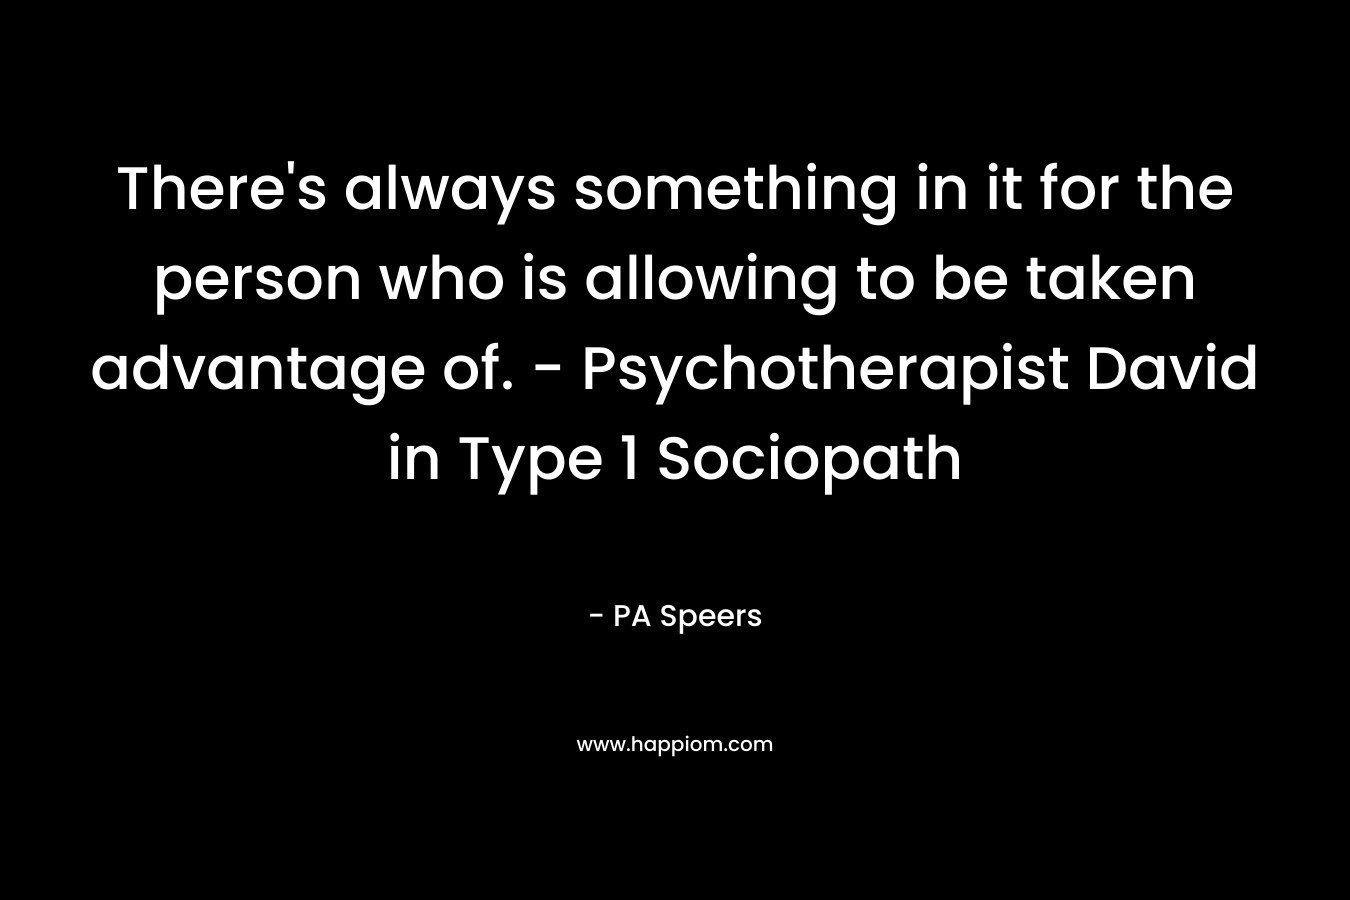 There's always something in it for the person who is allowing to be taken advantage of. - Psychotherapist David in Type 1 Sociopath